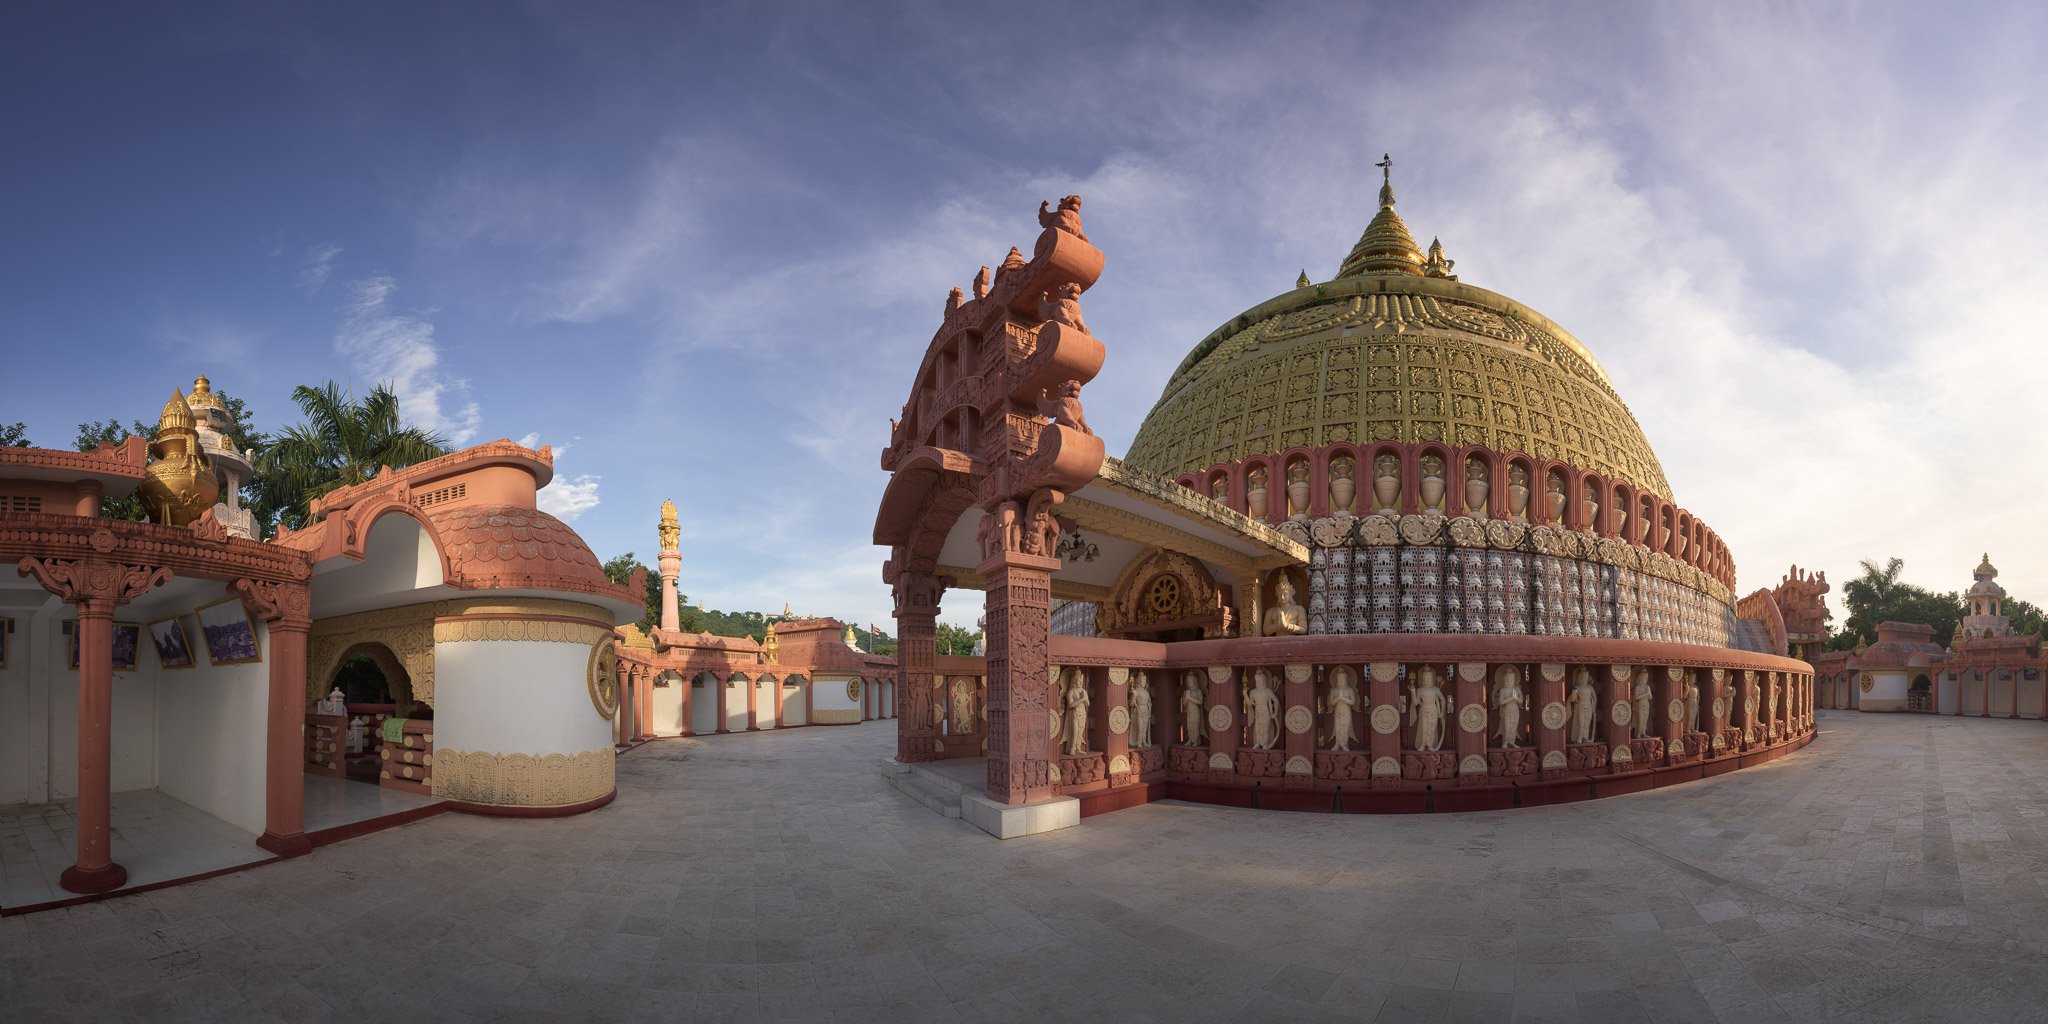 academy, architecture, asia, asian, attraction, blue, buddha, buddhism, buddhist, building, burma, burmese, city, complex, culture, dome, evening, exterior, famous, heritage, historic, history, international, landmark, majestic, mandalay, monument, myanma, Andrey Omelyanchuk